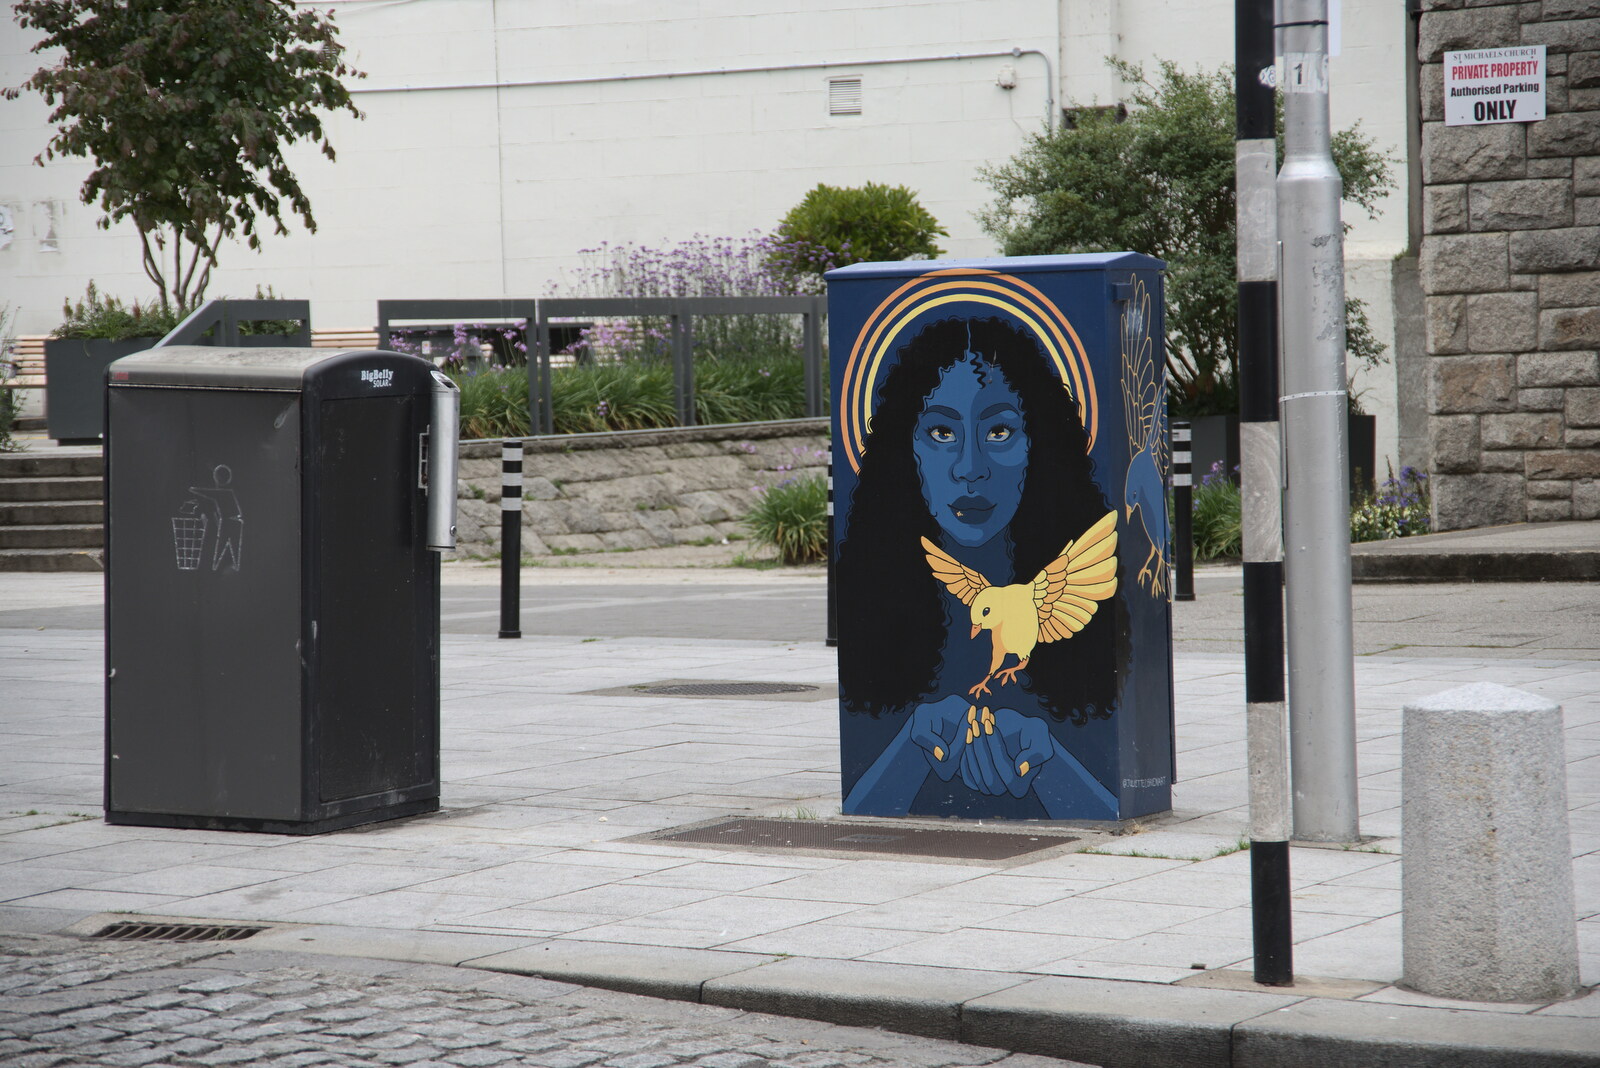 Street art on a traffic light control box from Manorhamilton and the Street Art of Dún Laoghaire, Ireland - 15th August 2021